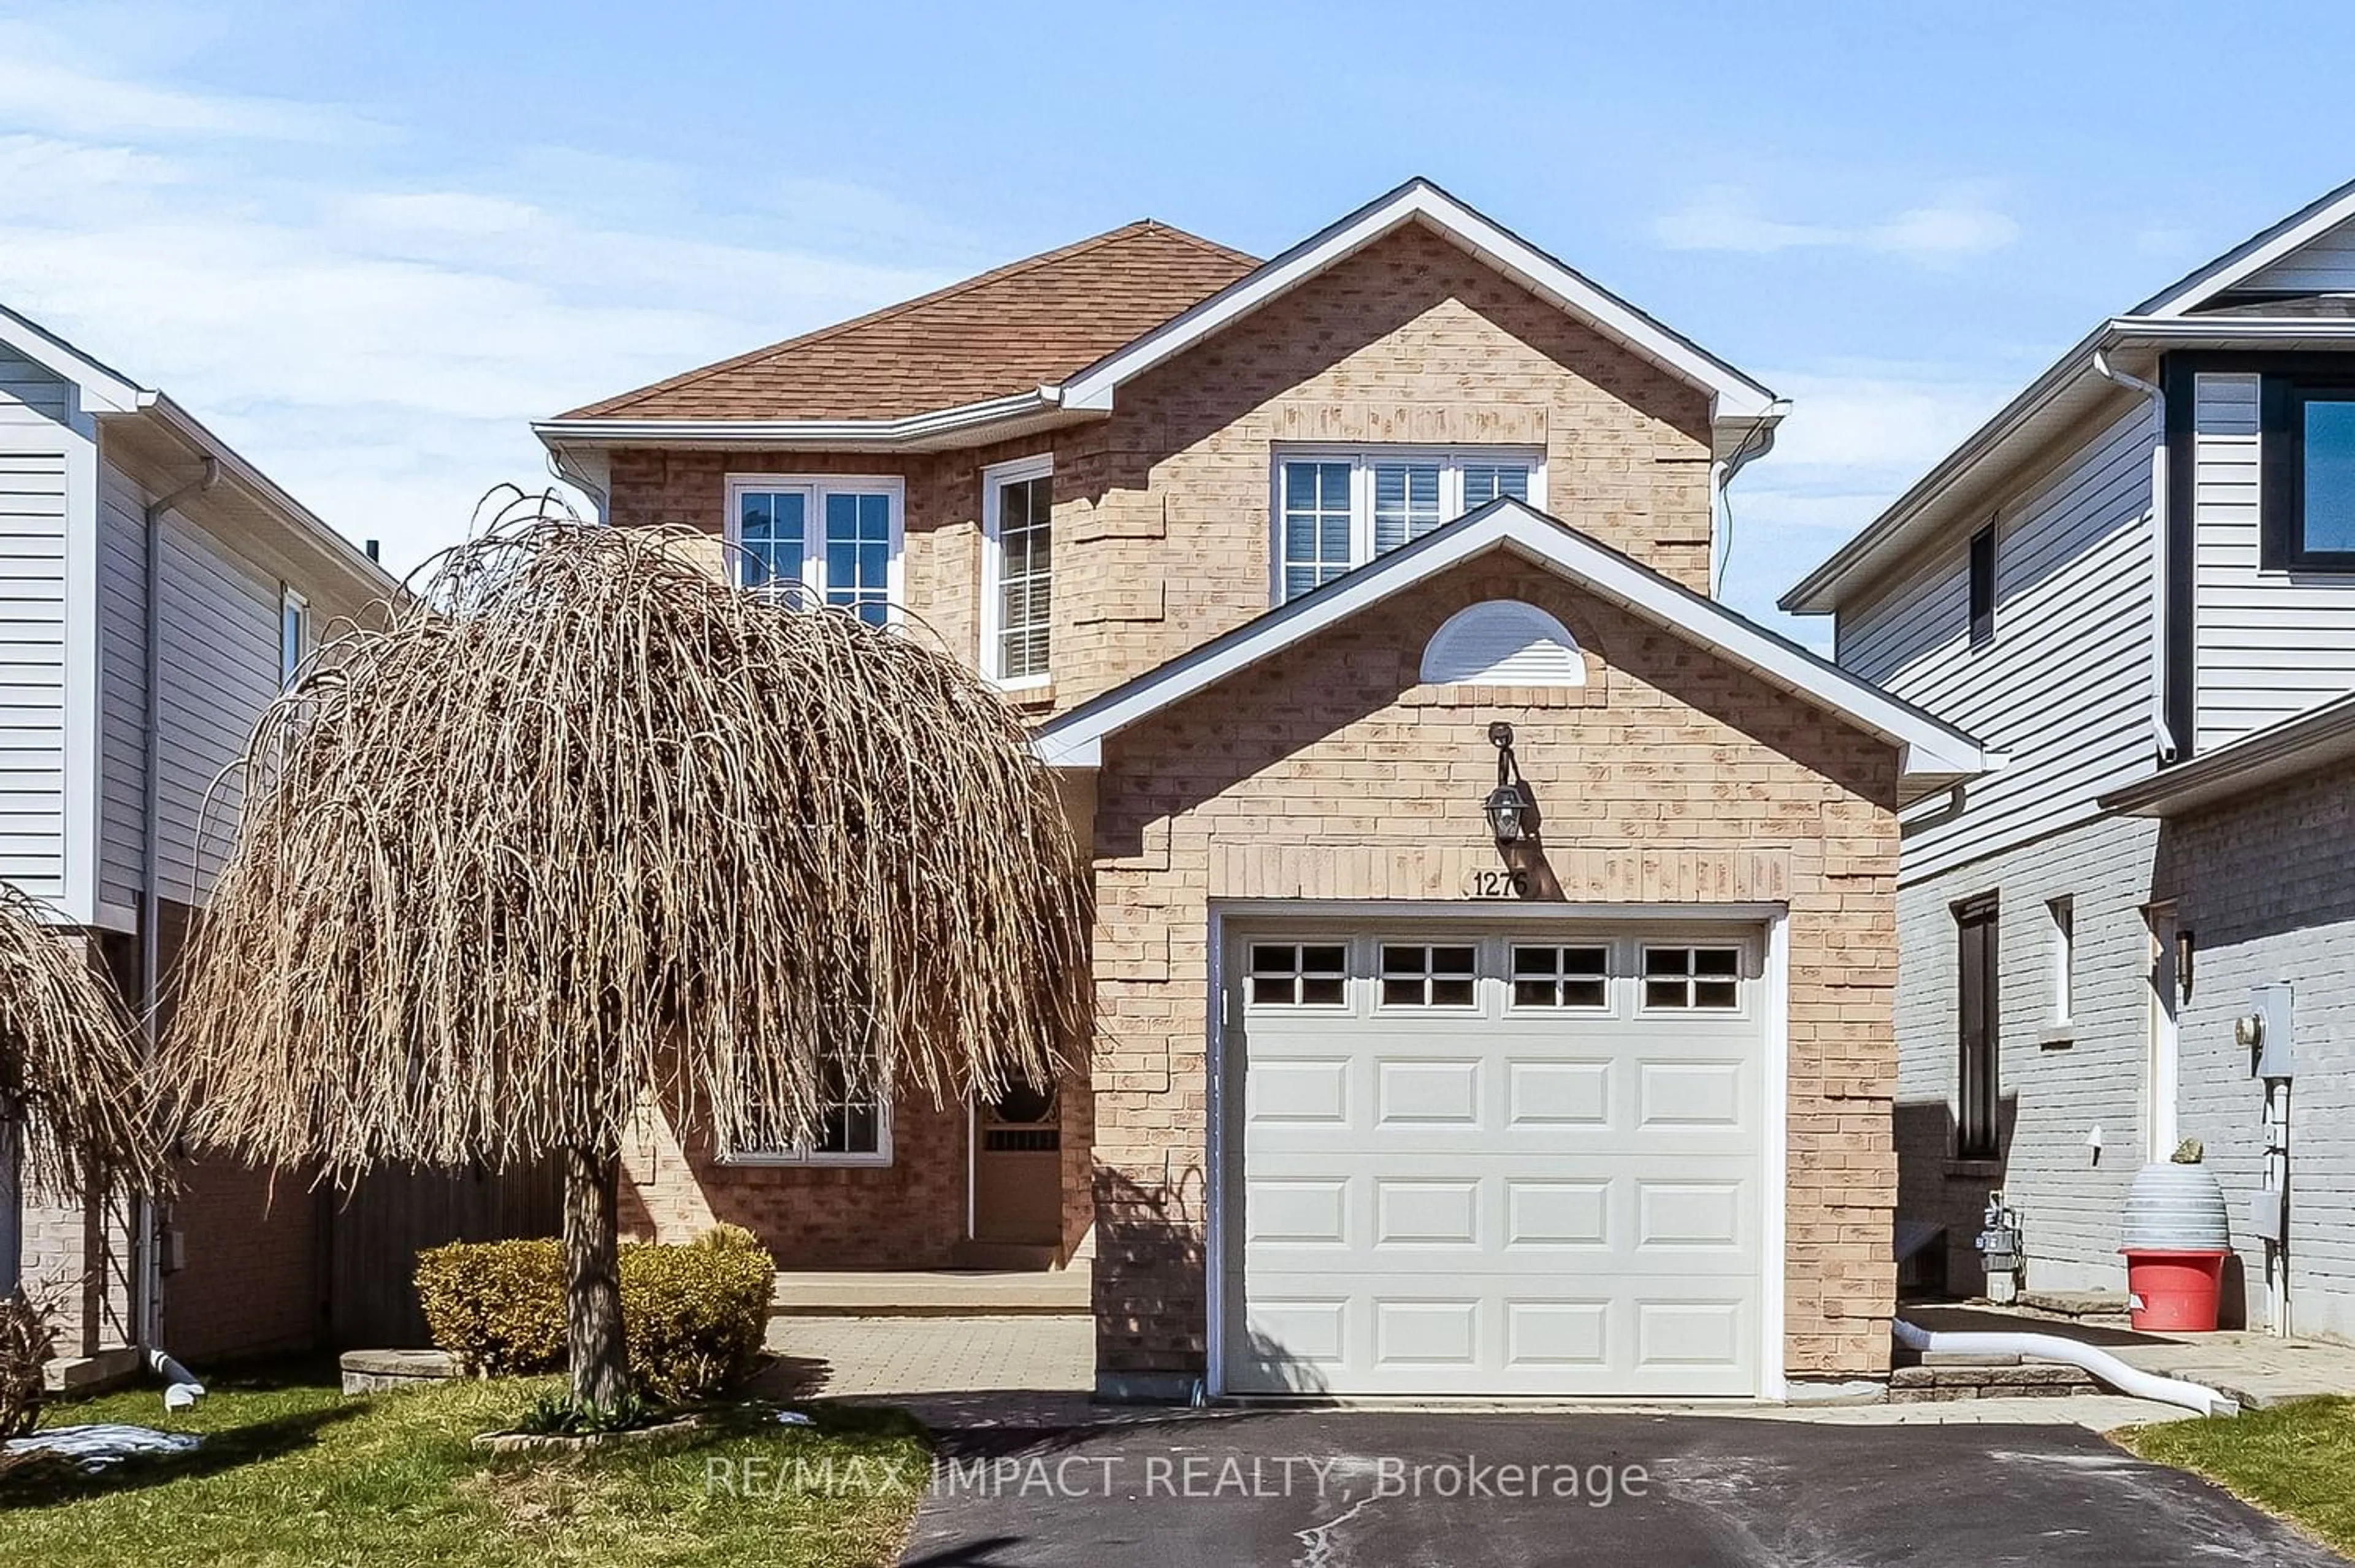 Home with brick exterior material for 1276 Dartmoor St, Oshawa Ontario L1K 2M7